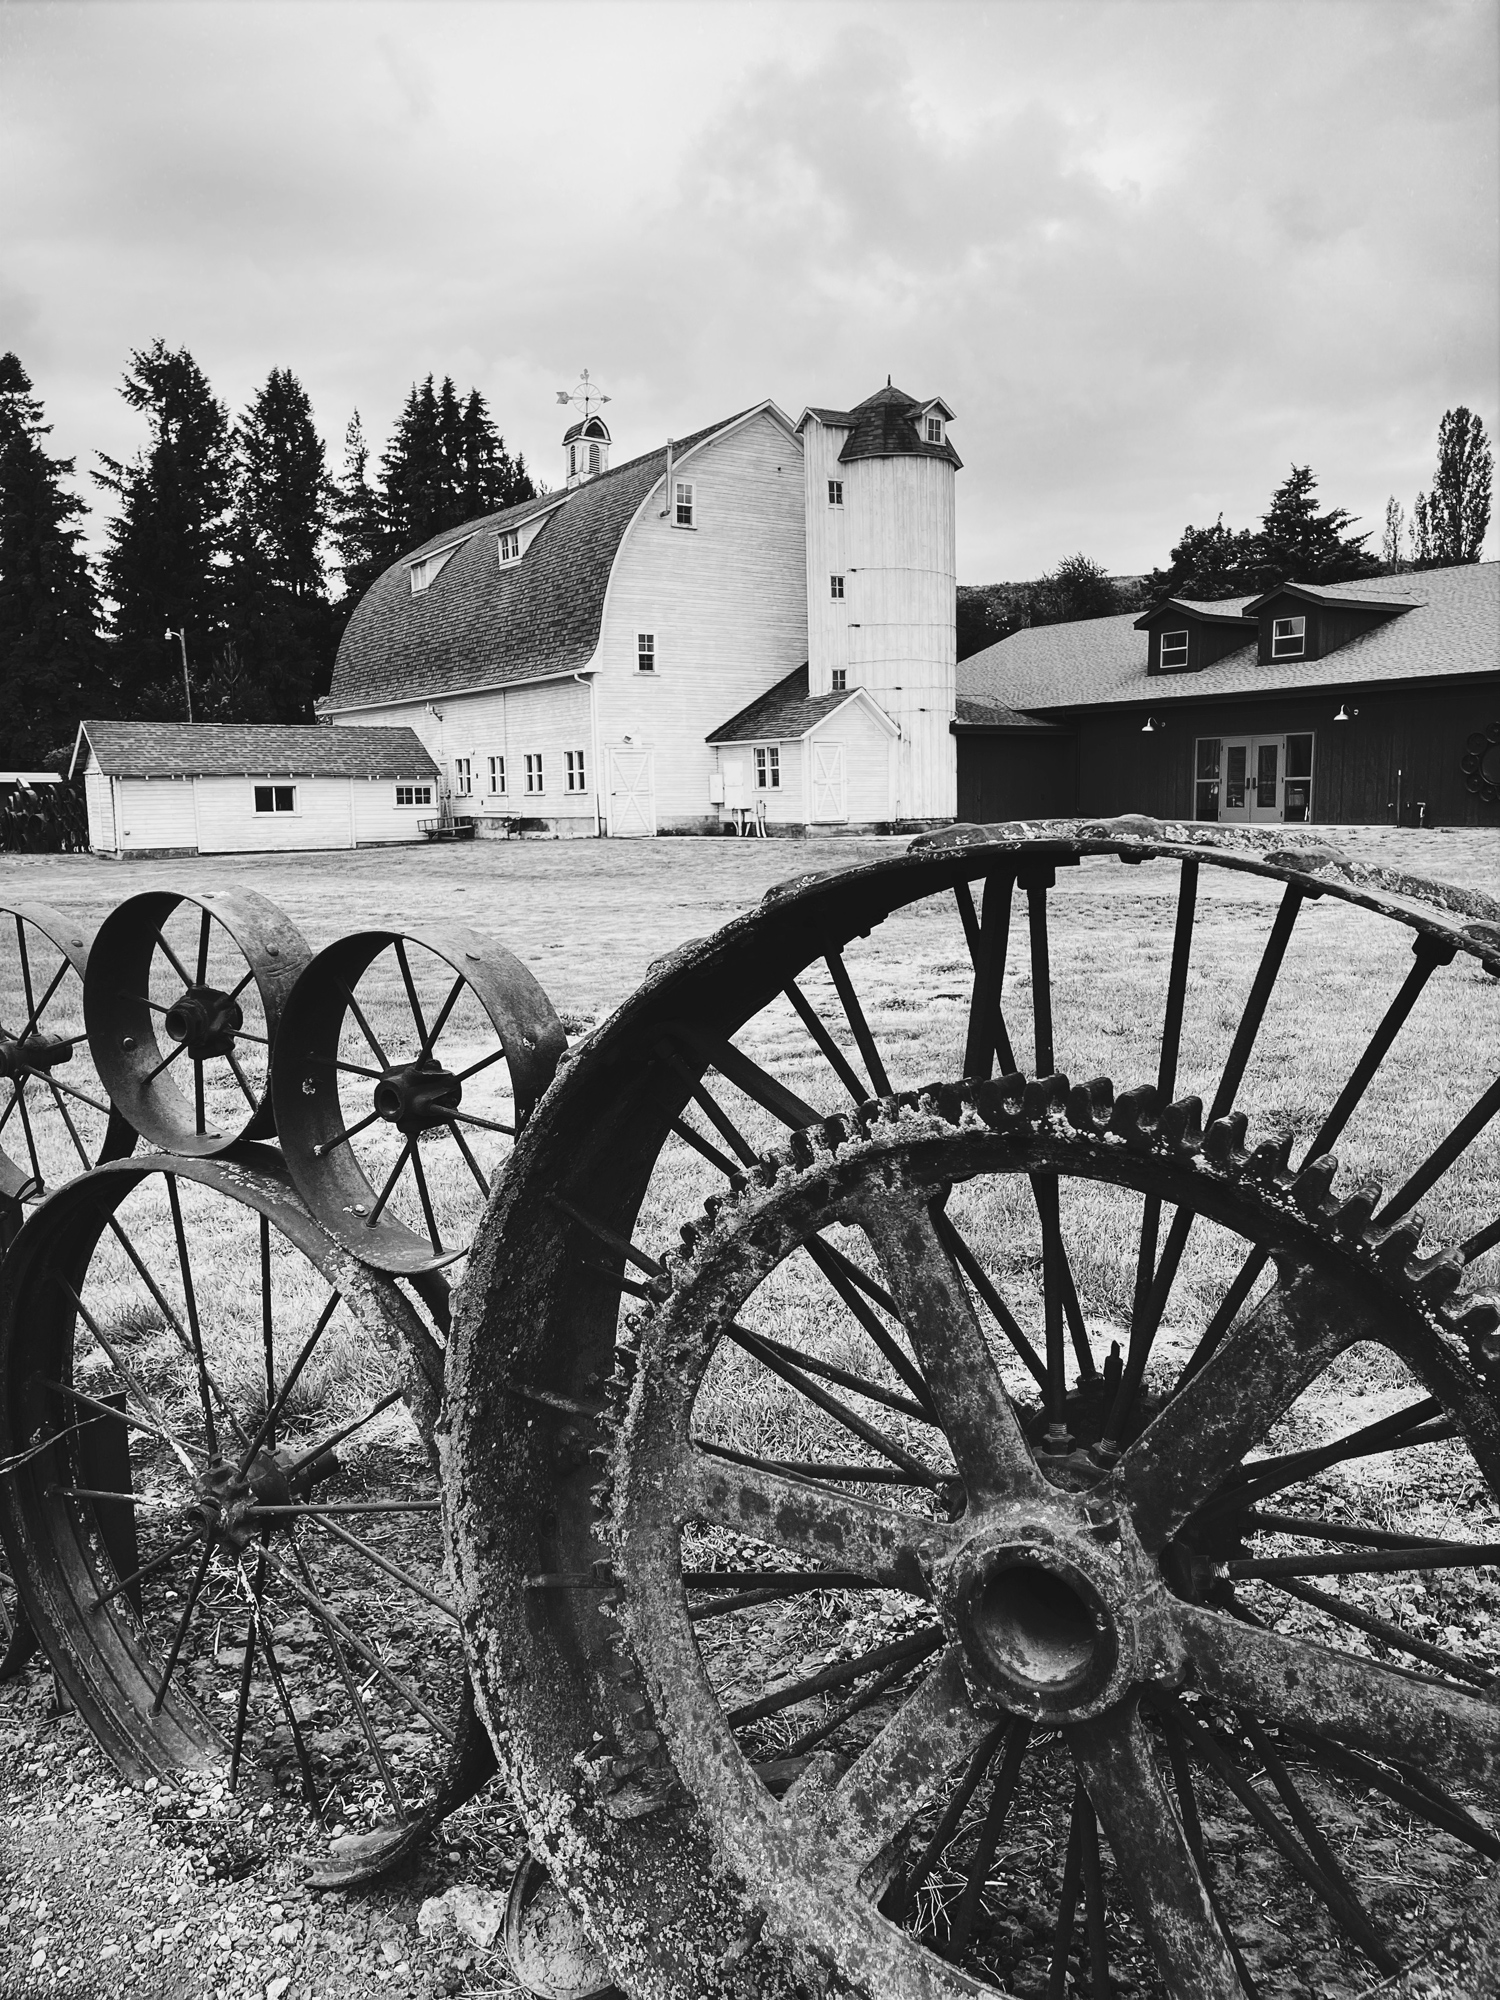 This is an artisians craft barn surrounded by an iron wagon wheel fence